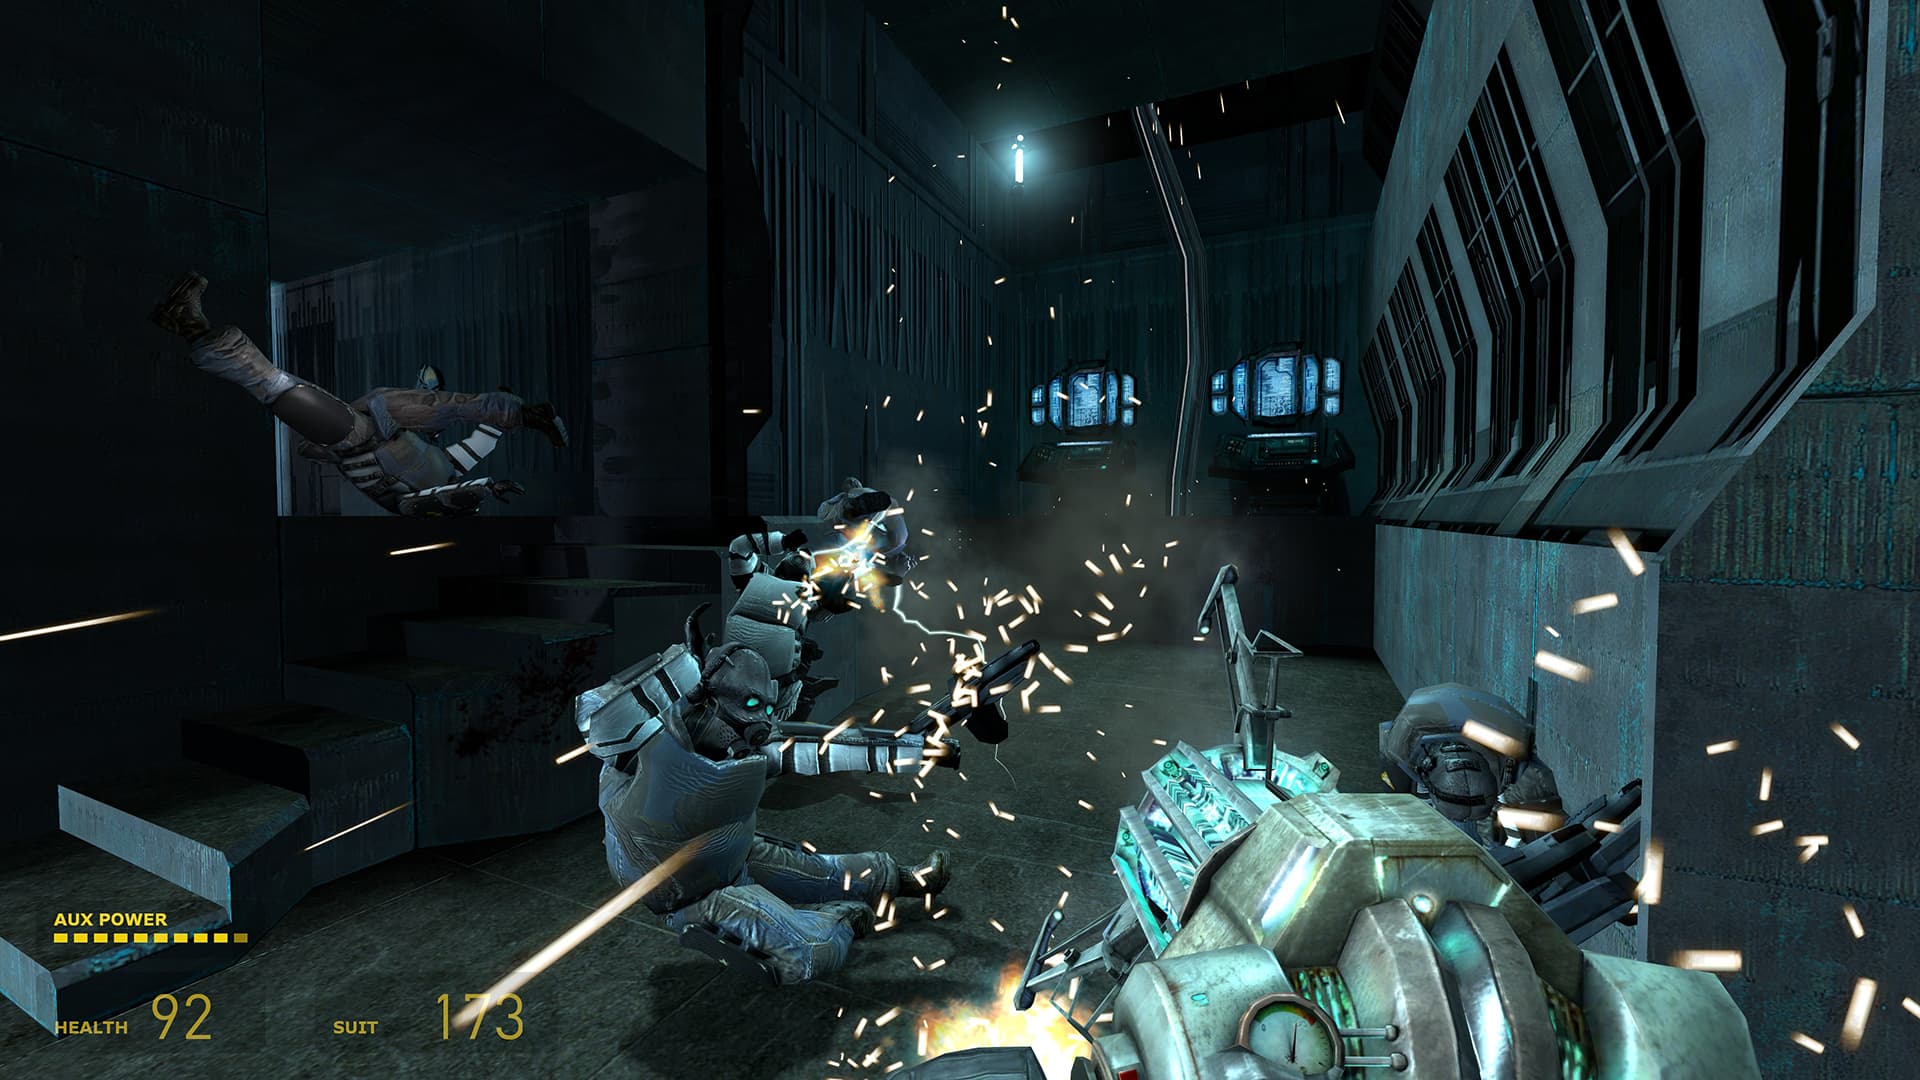 A screenshot from Half-Life 2. The bodies of Combine soldiers fly through the air at the Citadel after the player, as Gordon Freeman, punts one with their supercharged Gravity Gun.